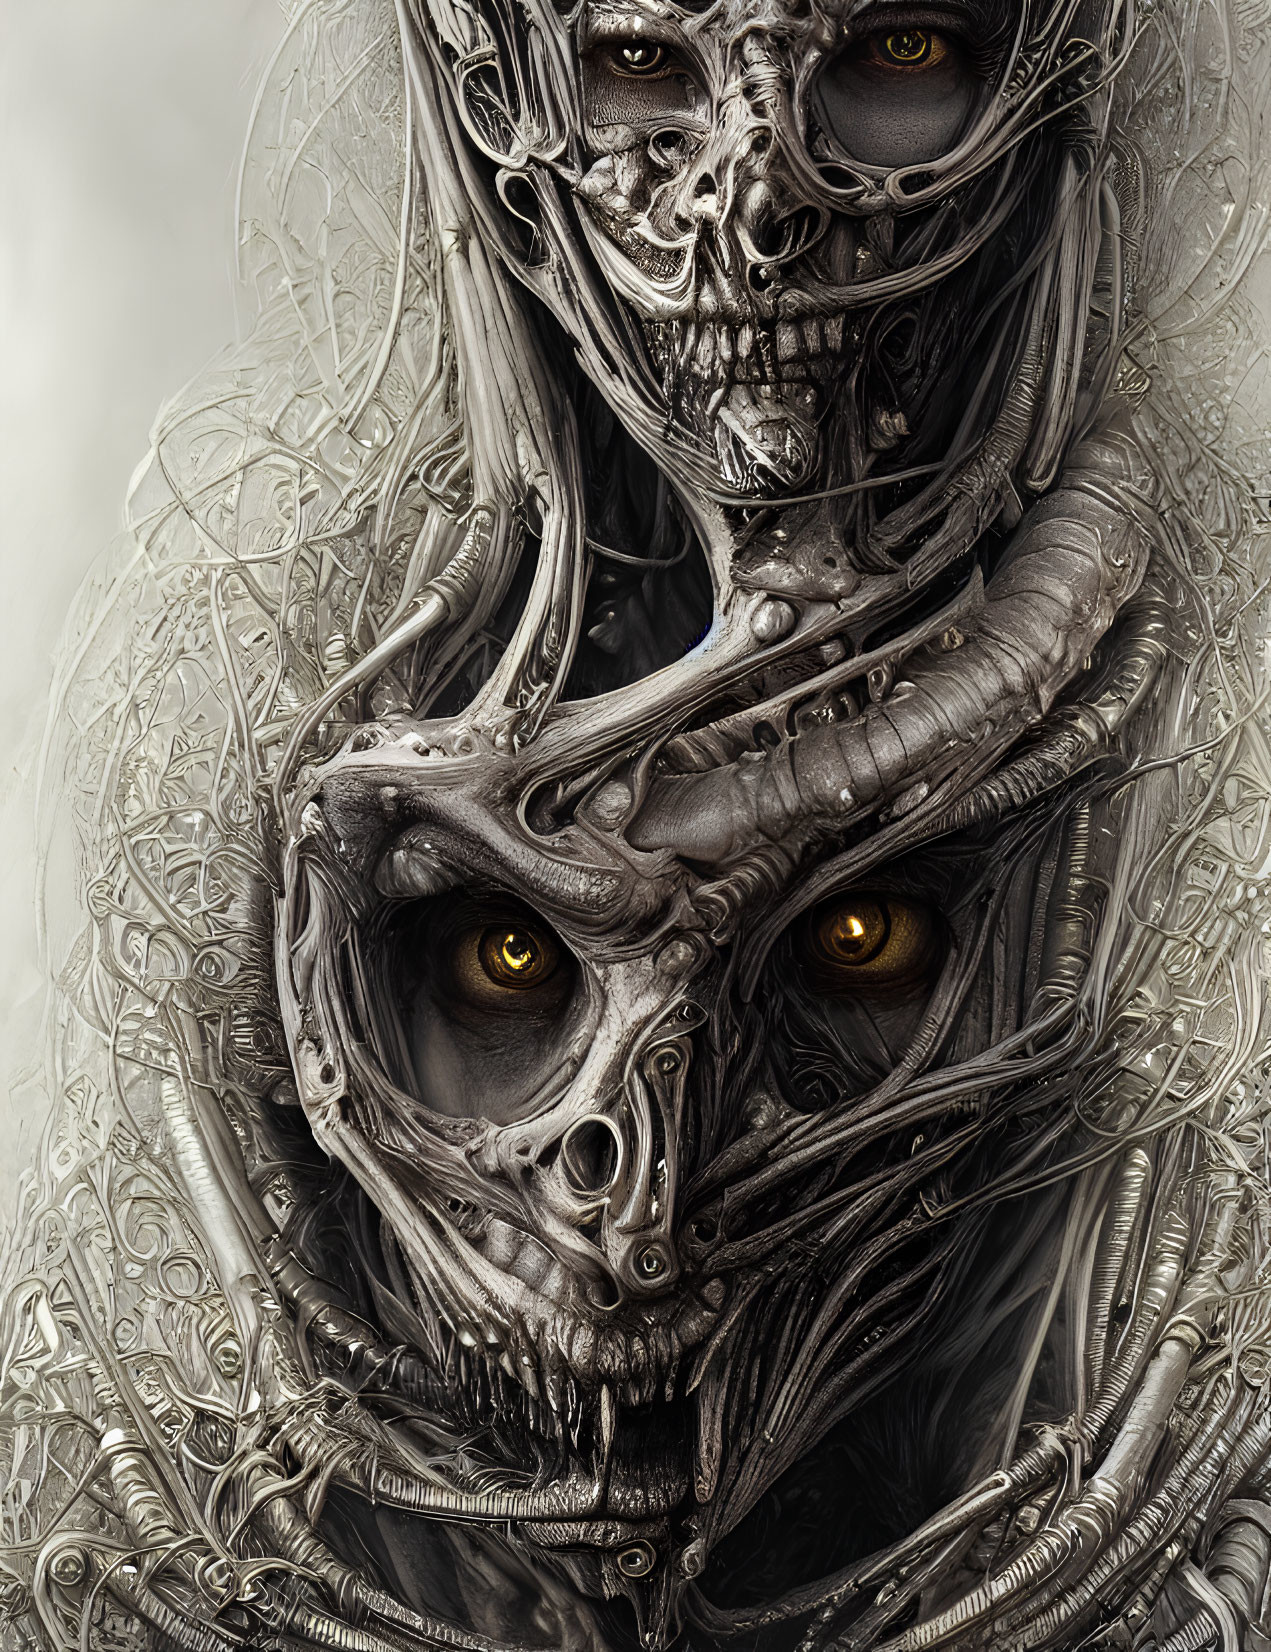 Detailed digital art: Two robotic skulls with intricate designs and glowing yellow eyes